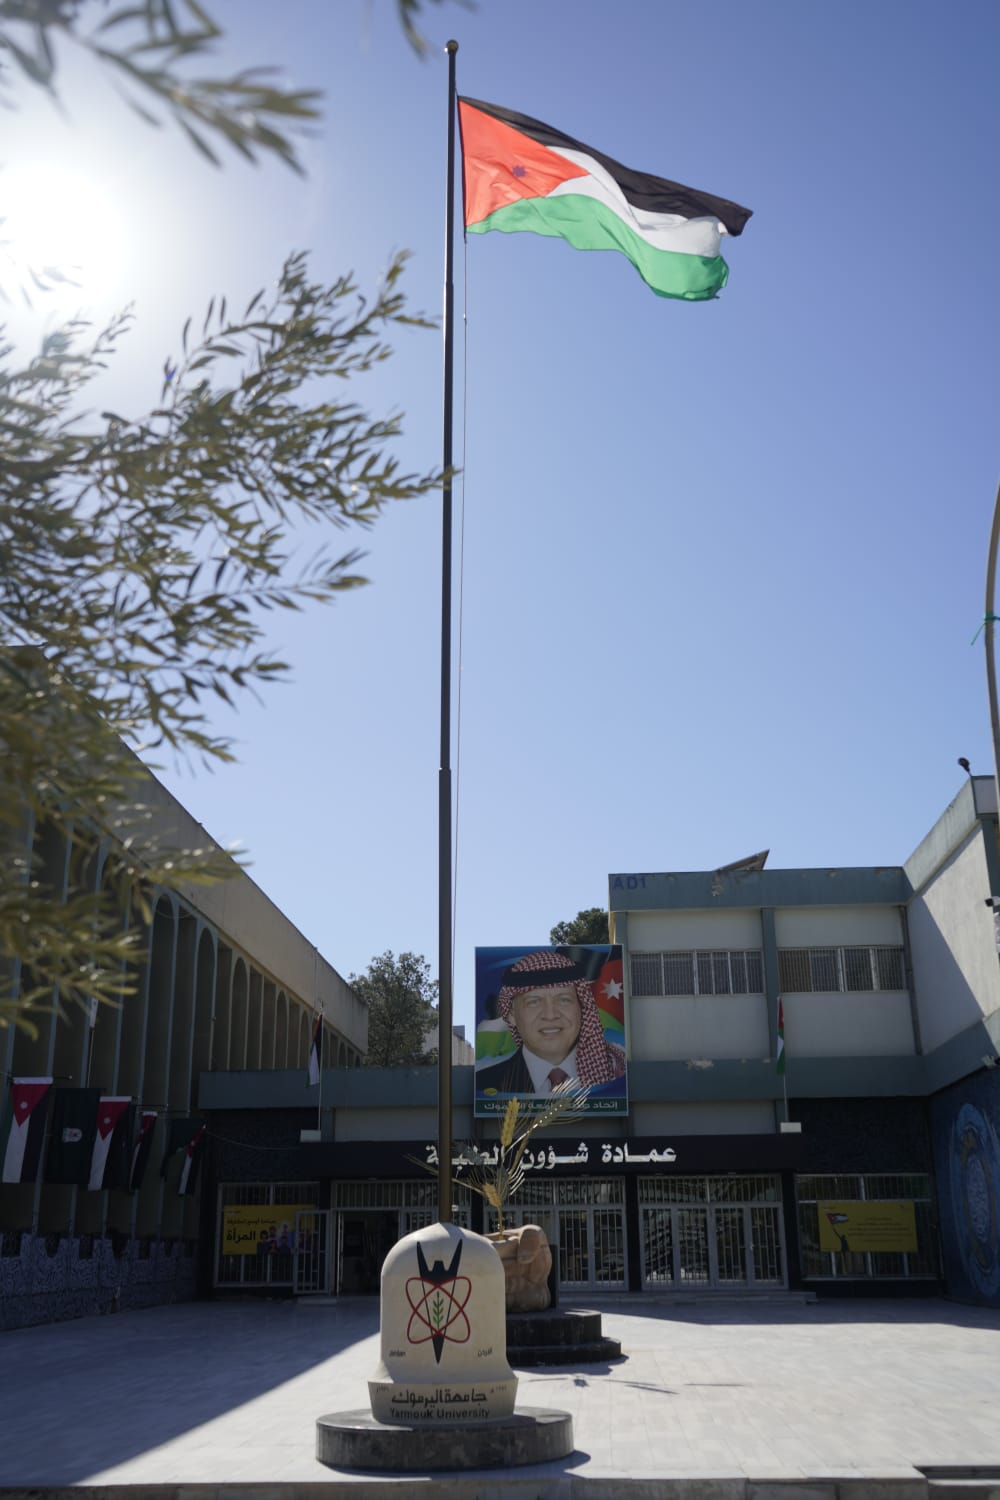 To Celebrate the Silver Jubilee, the Student Affairs at Yarmouk Sets up a Jordanian Flagpole at the University